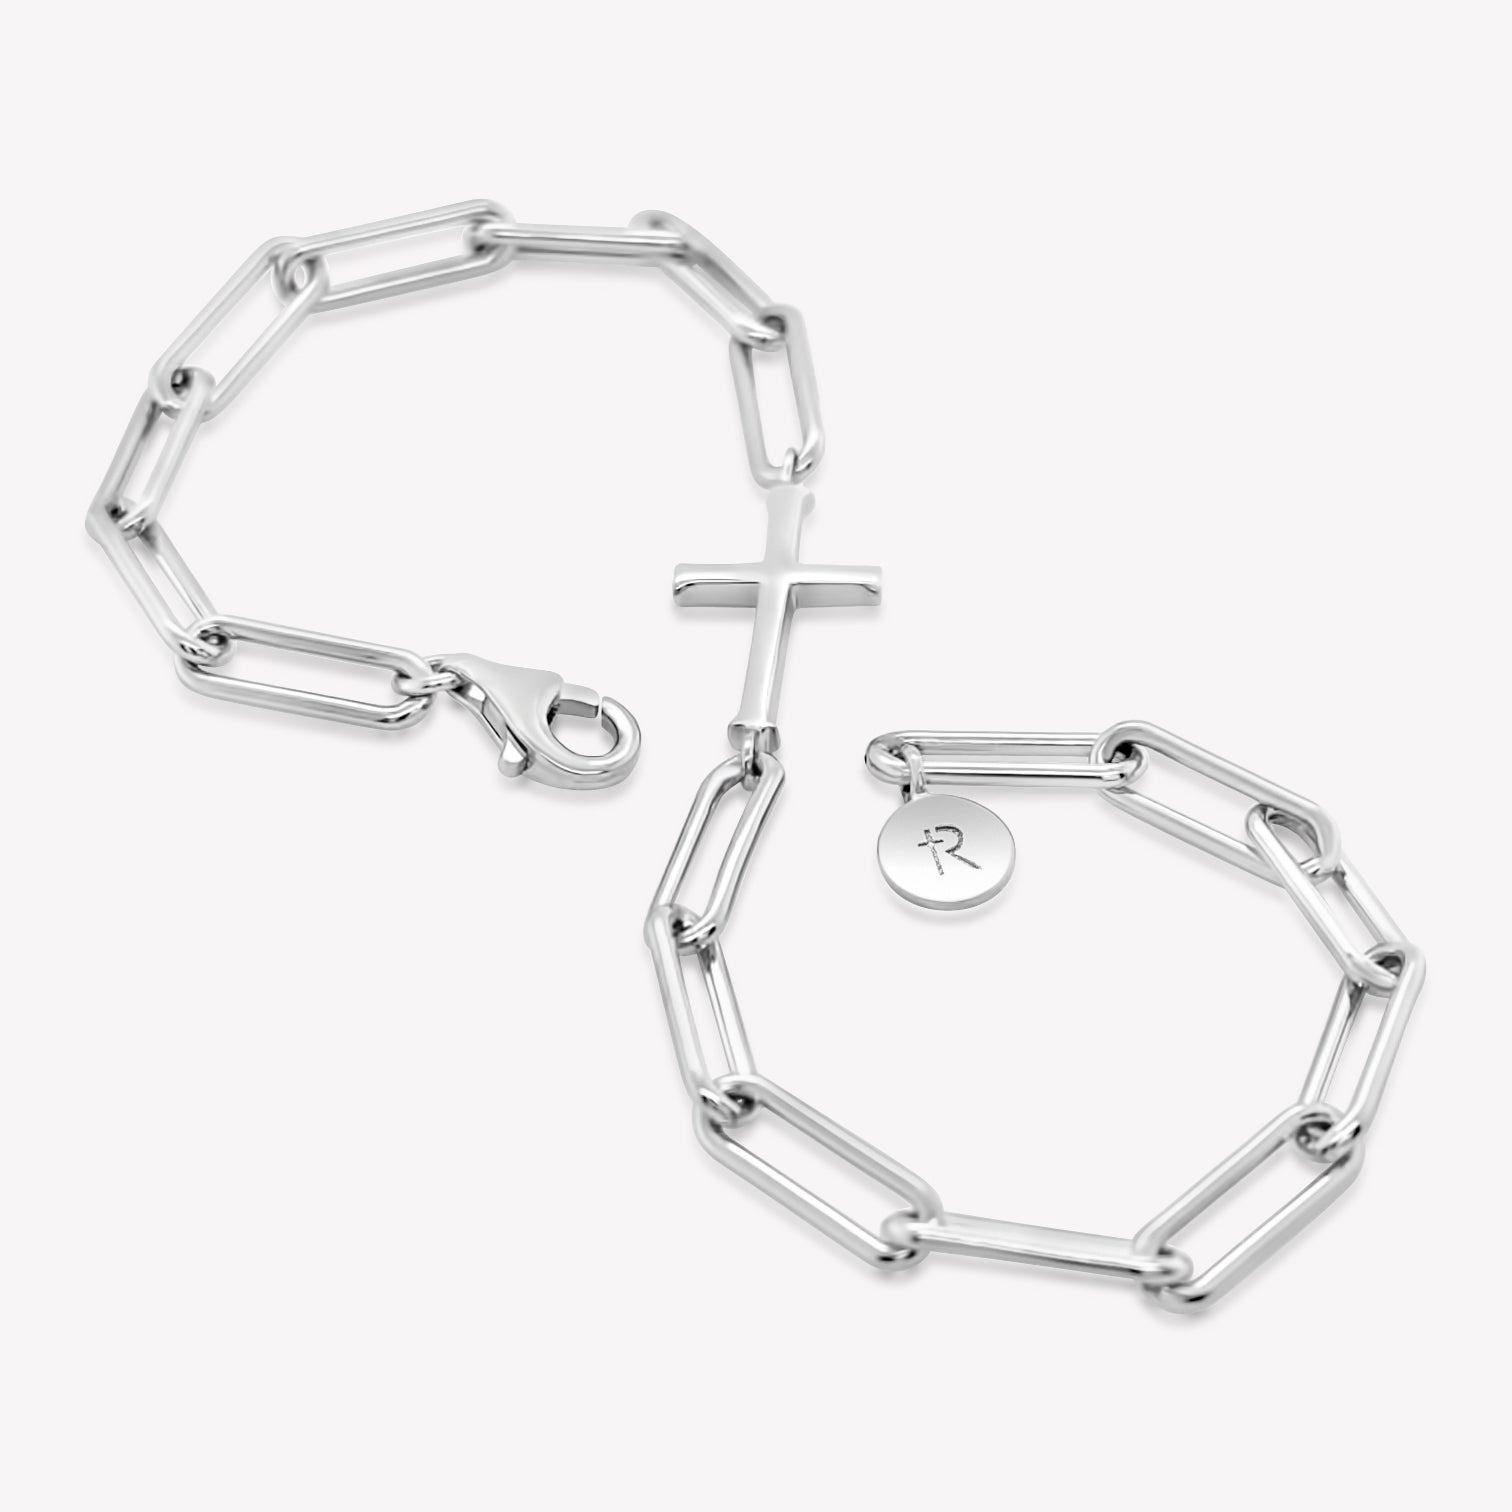 Rizen Jewelry Chain Breaker bracelet in Sterling Silver.  Elegant Cross Pendant breaks up the contemporary paper clip link chain with classic lobster clasp  closure, and circular Rizen tag on last link of chain wrapped in the shape of an infinity symbol.